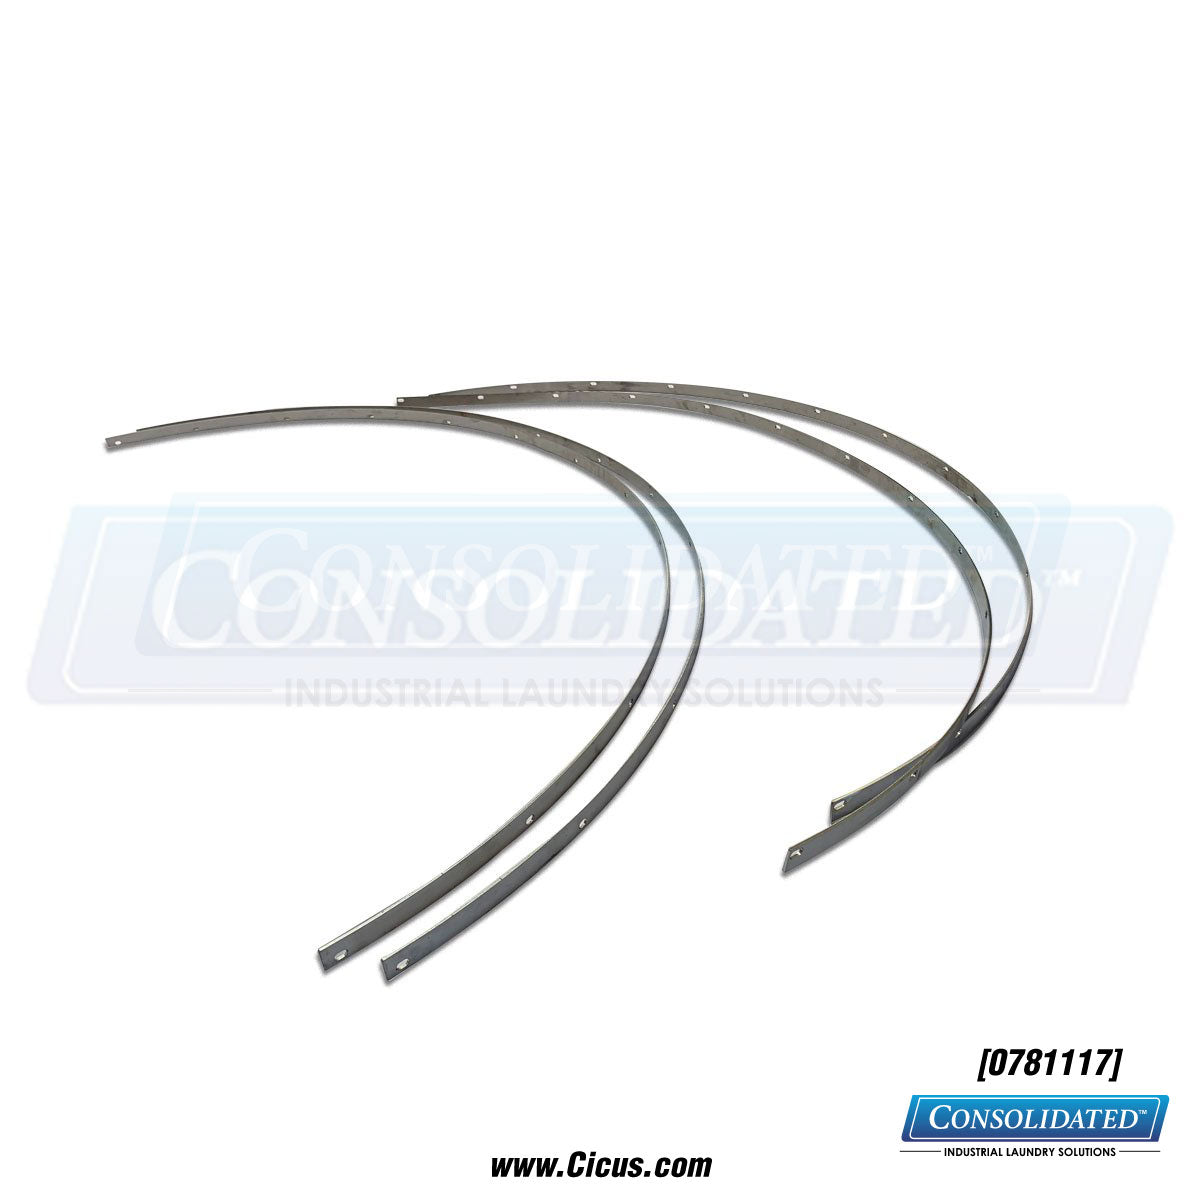 Milnor 7272 Cyl Seal Retainer Strip [07 81117] - Side View